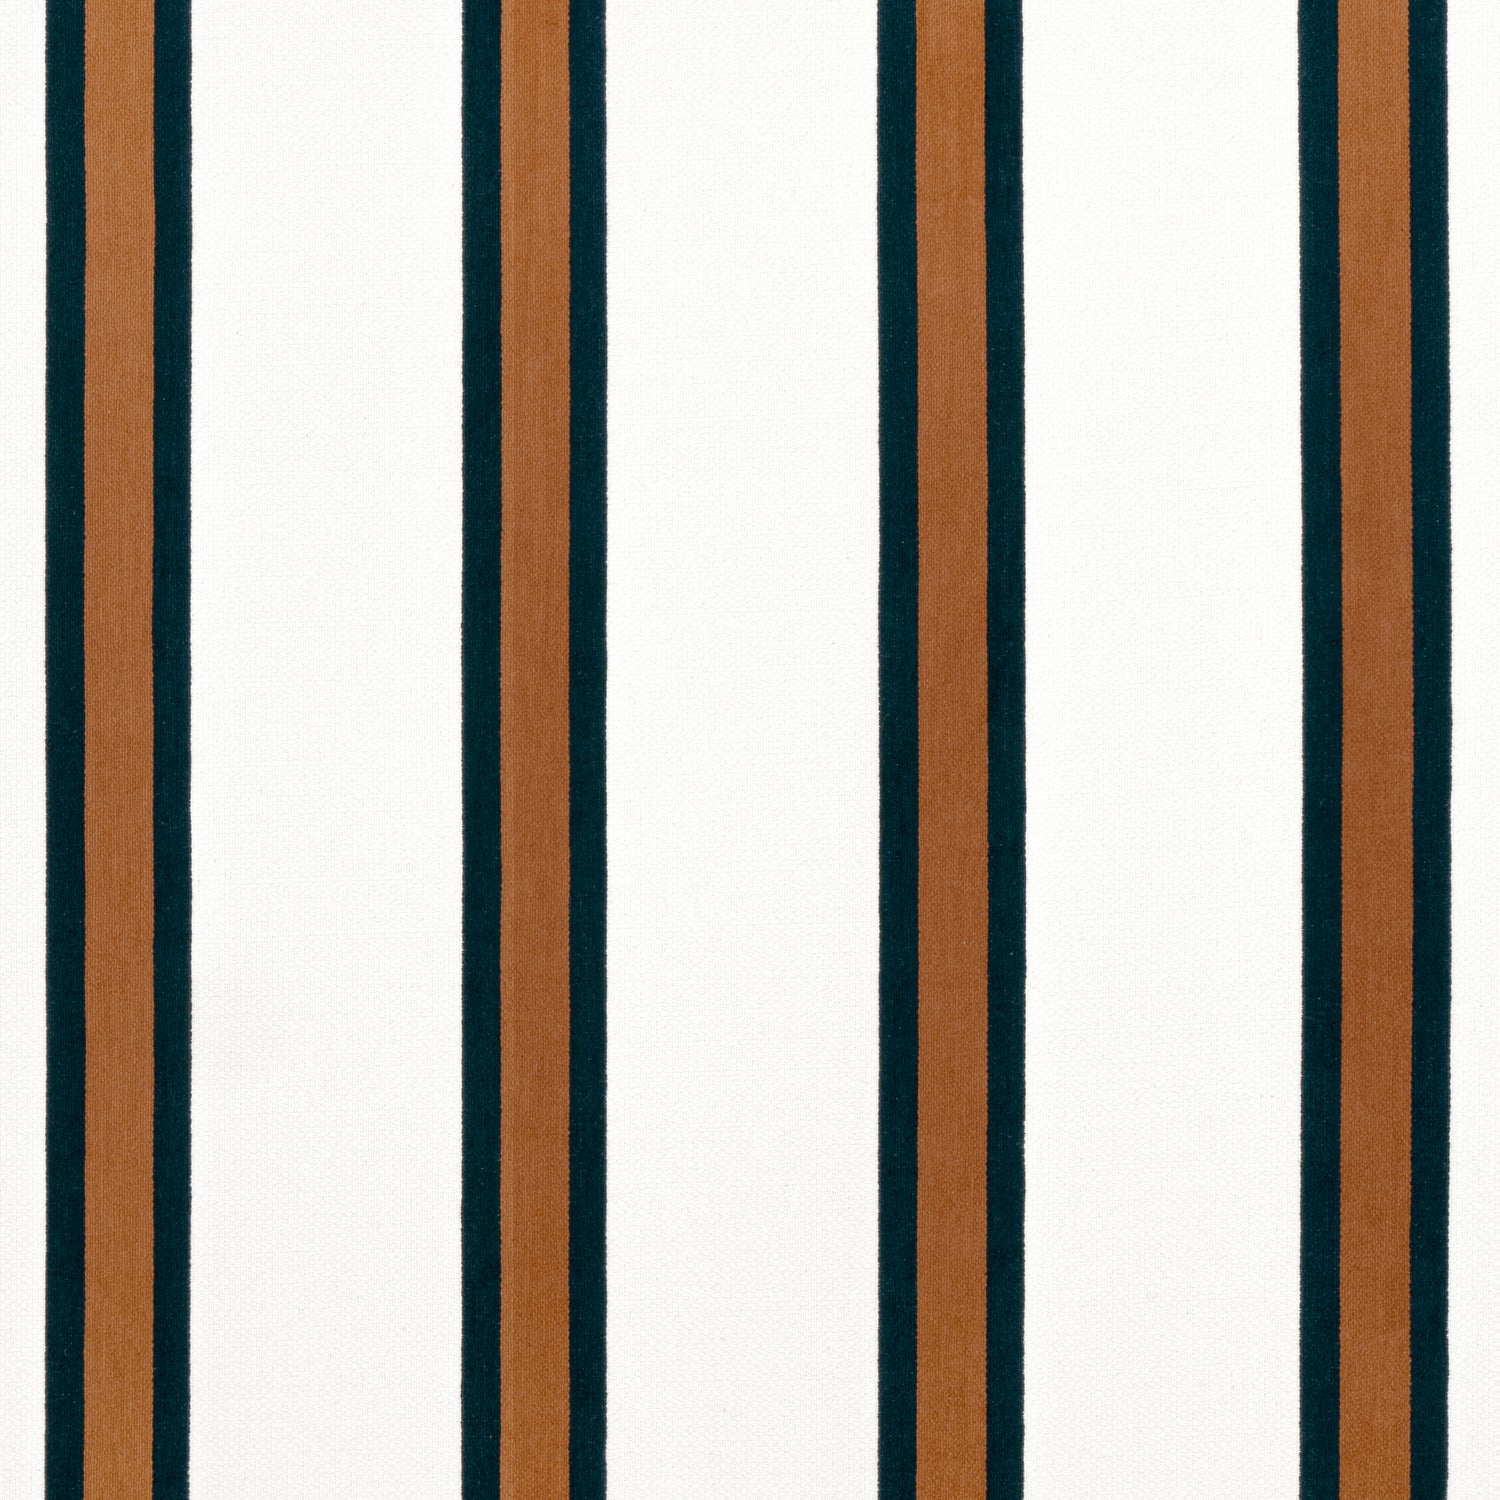 Abito Stripe fabric in copper color - pattern number W77141 - by Thibaut in the Veneto collection